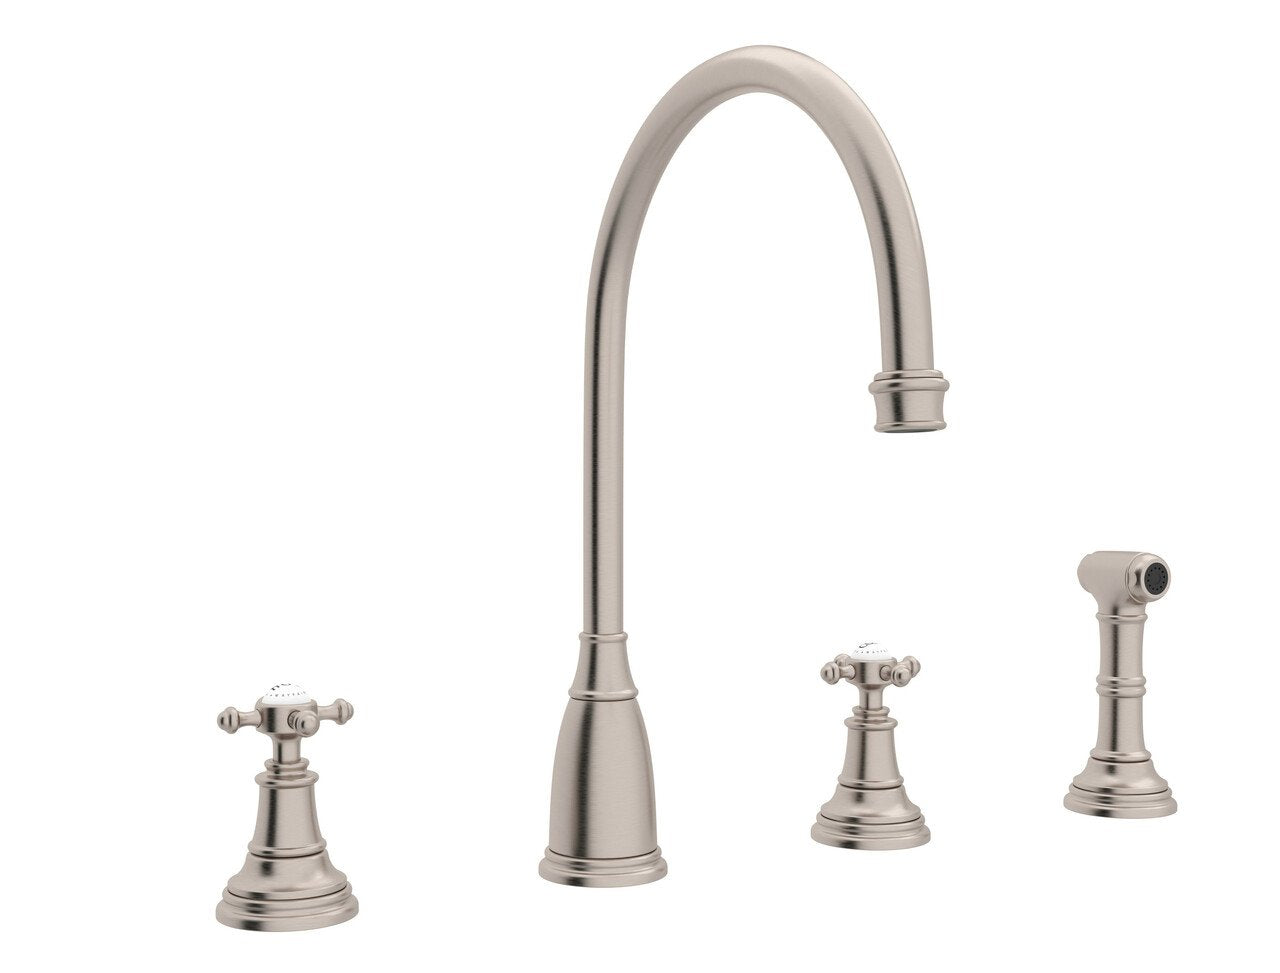 Perrin & Rowe Georgian Era 4-Hole C-Spout Kitchen Faucet with Sidespray - BNGBath